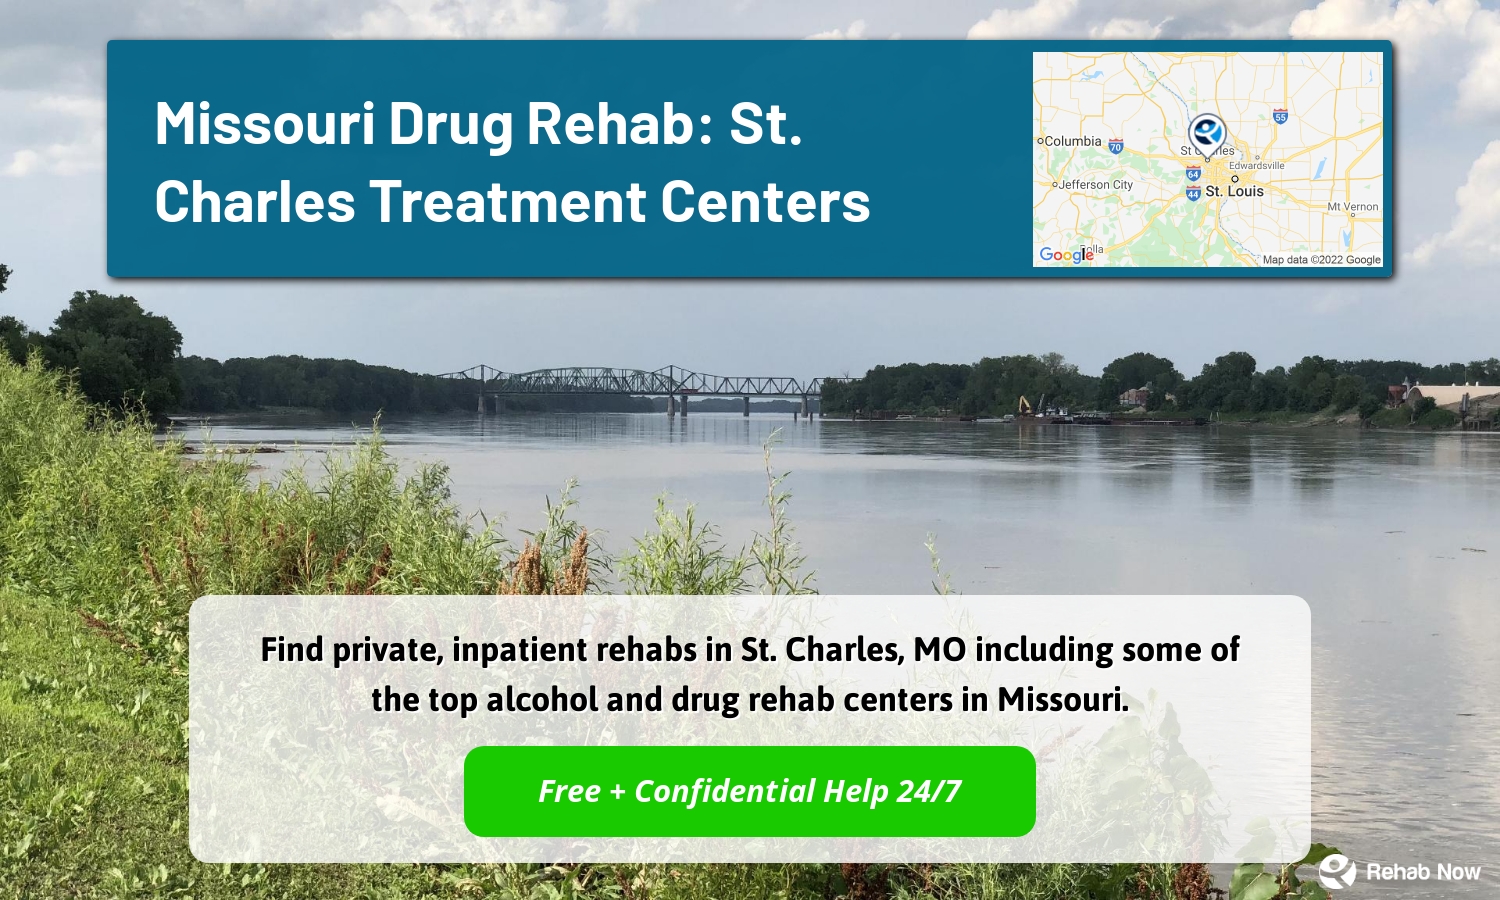 Find private, inpatient rehabs in St. Charles, MO including some of the top alcohol and drug rehab centers in Missouri.